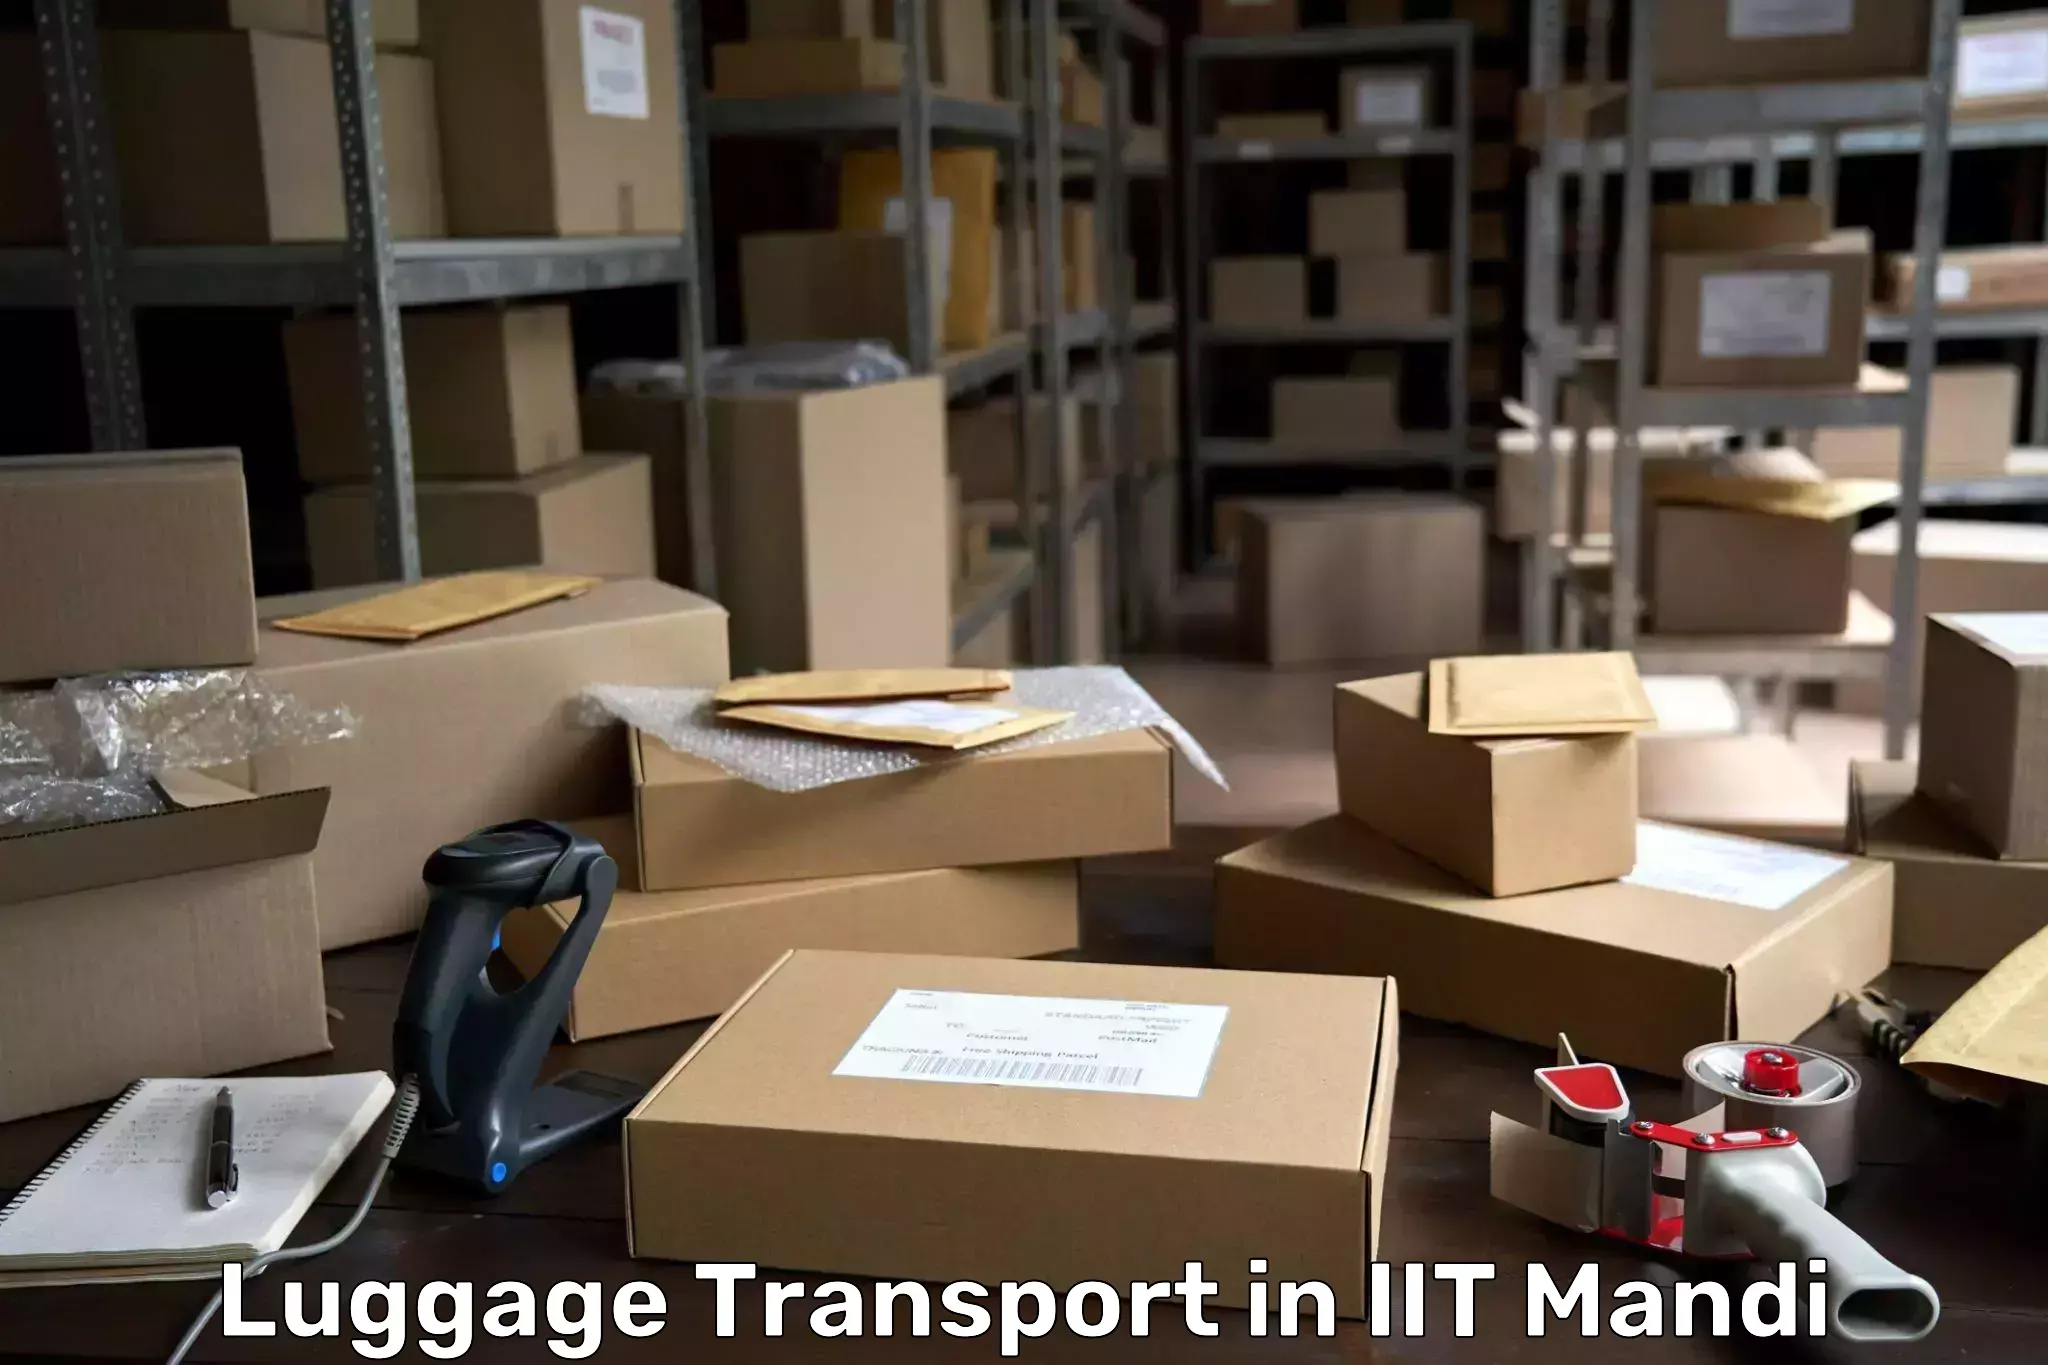 Baggage delivery technology in IIT Mandi